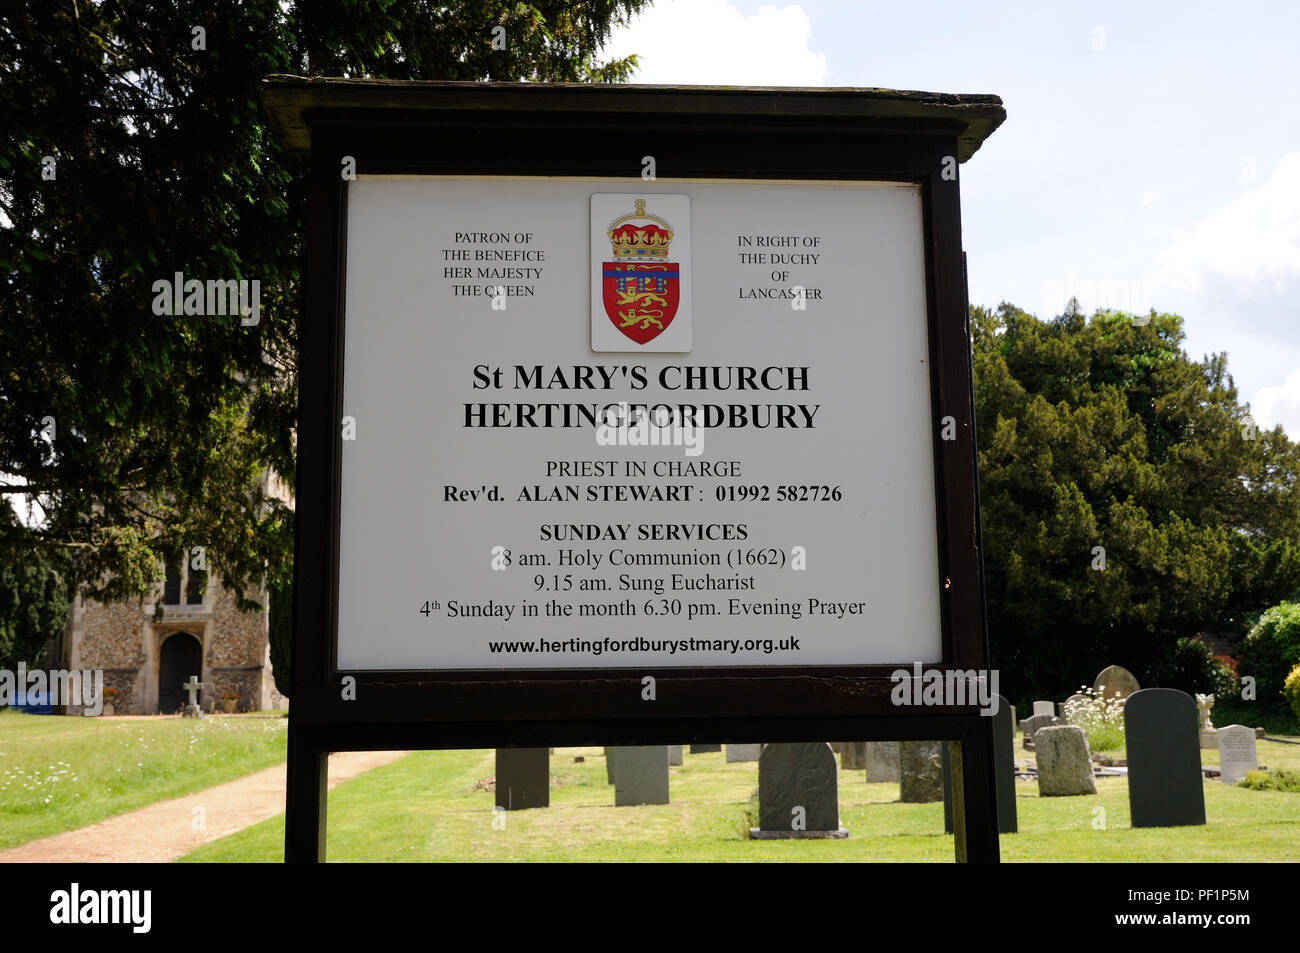 The Church sign, St Marys Church, Hertingfordbury,   Hertfordshire, tells us that the Patron of the Benefice is Her Majesty Stock Photo